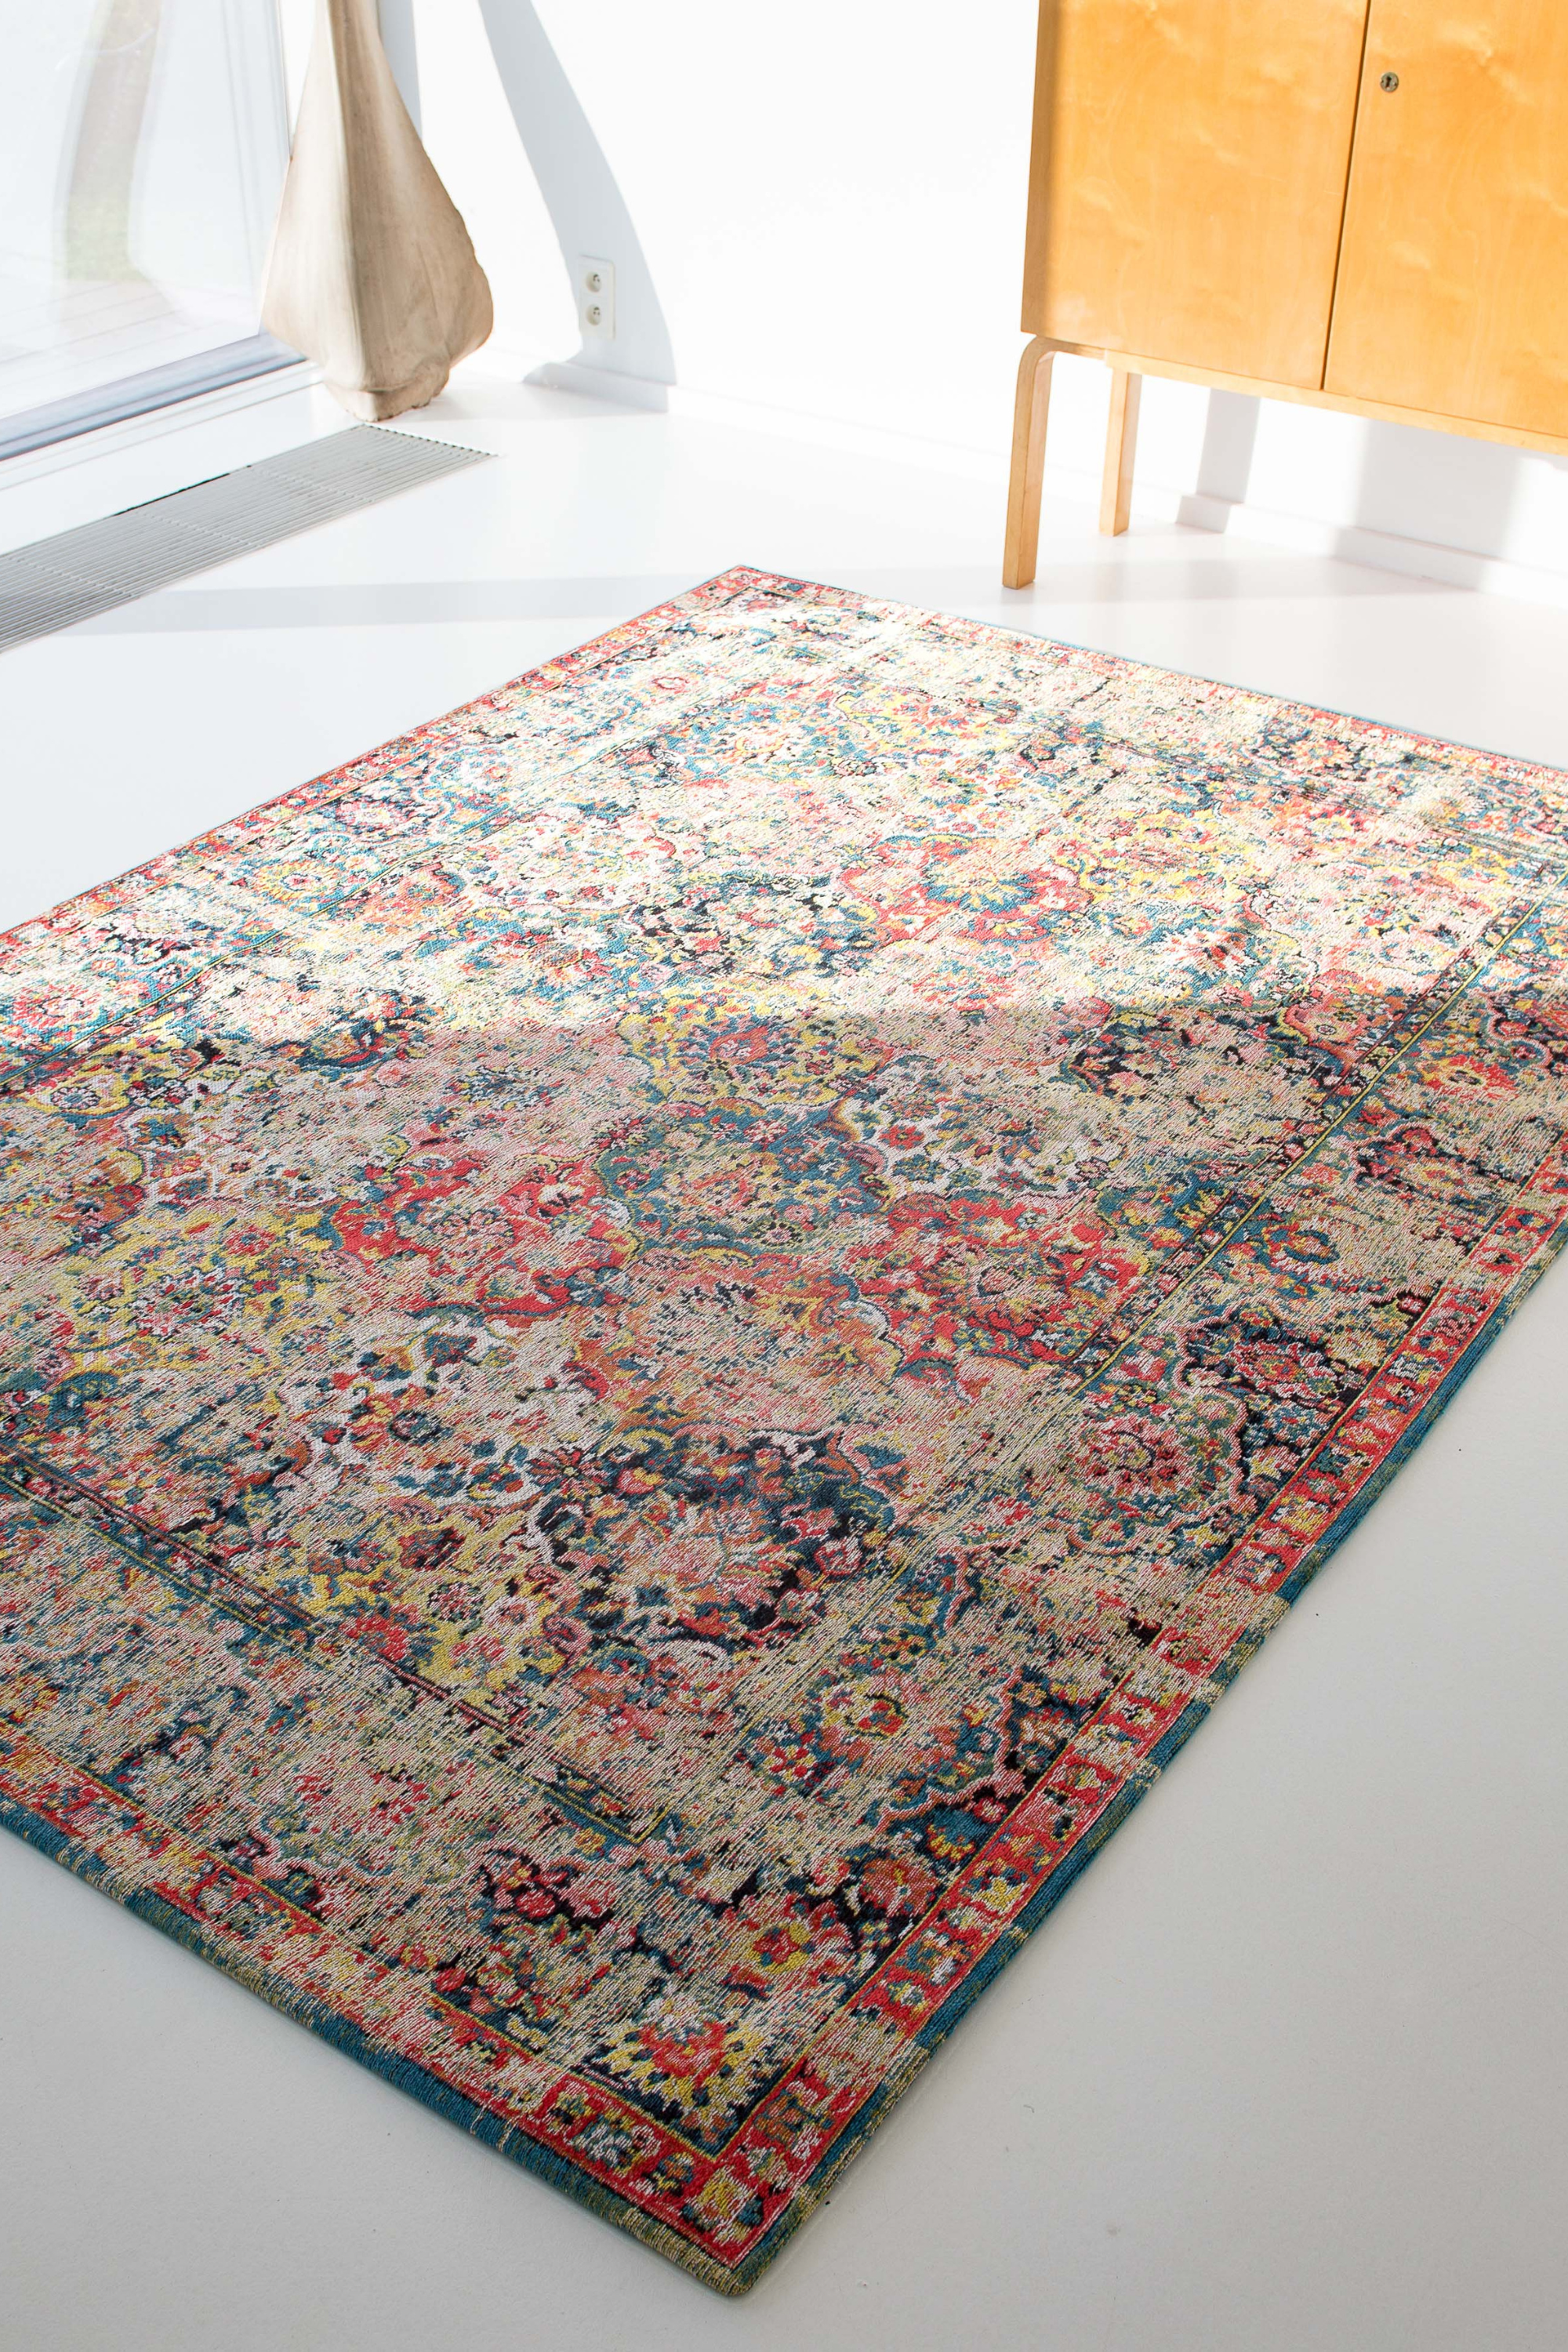 Flatweave rug with faded persian design in blue, red and yellow